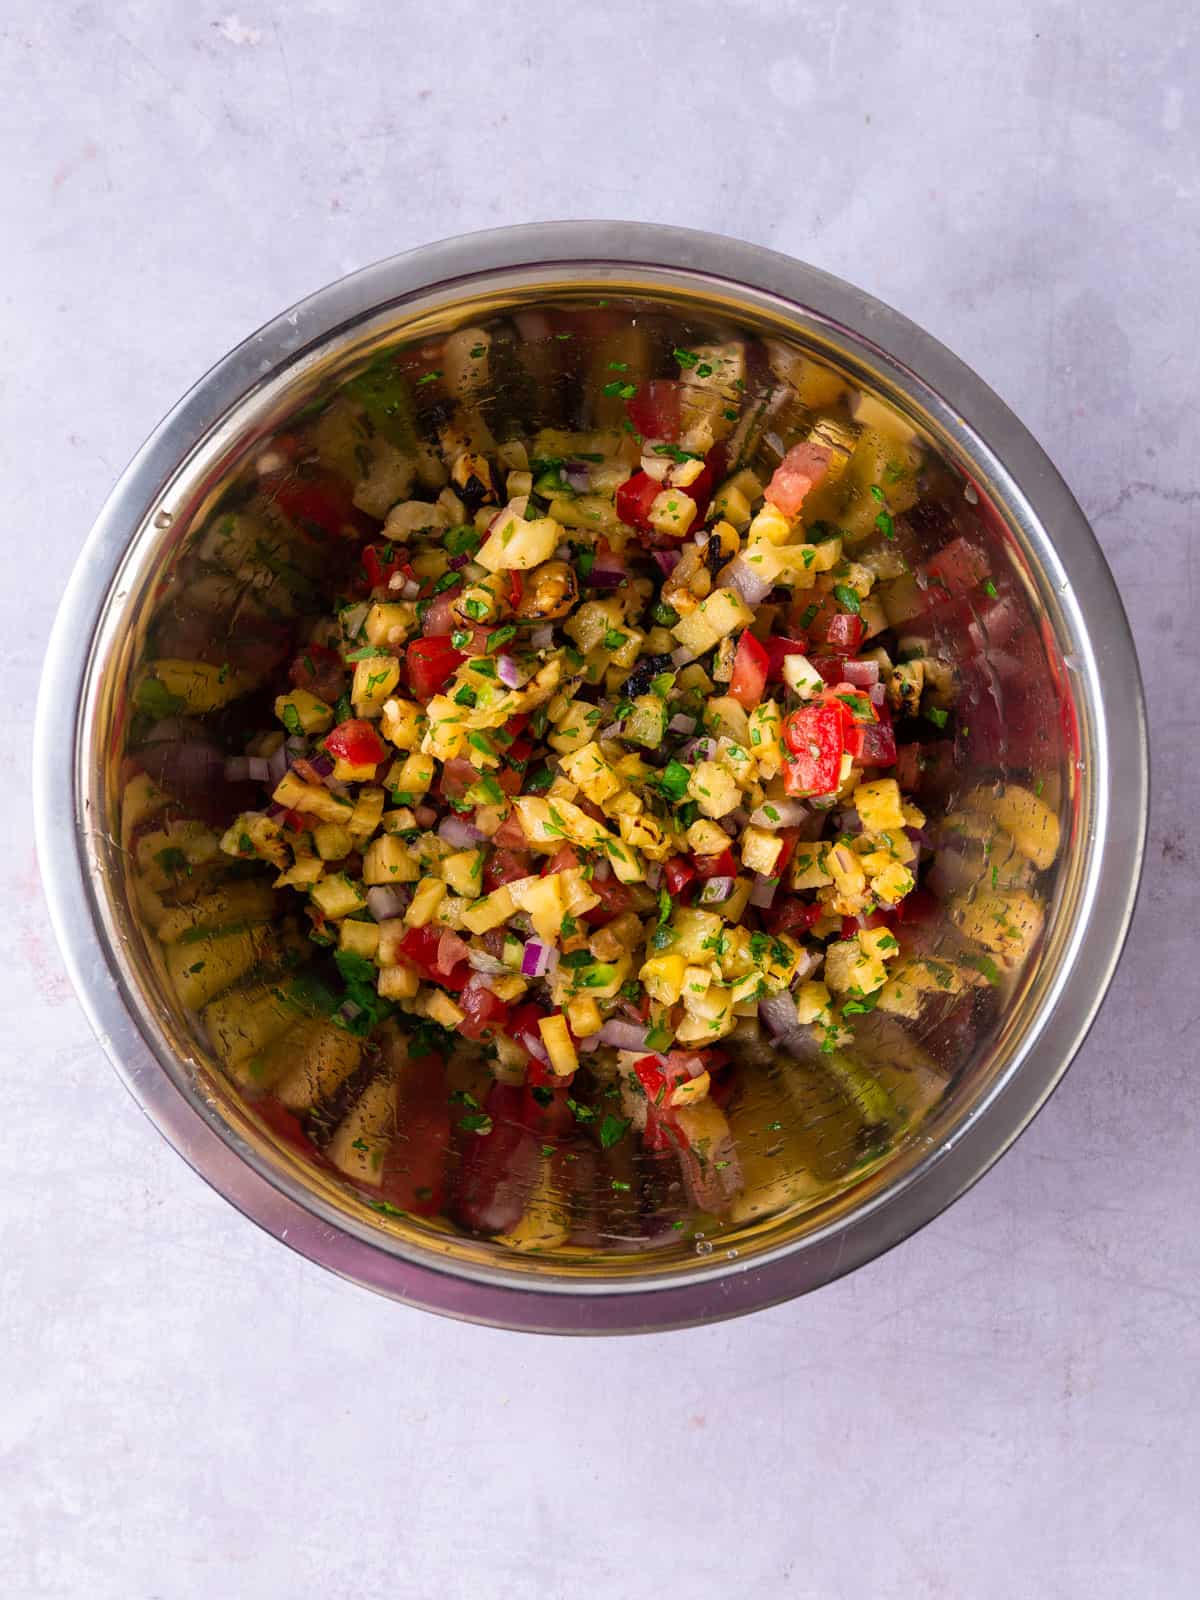 Mix the pineapple pico de gallo in a bowl until combined.